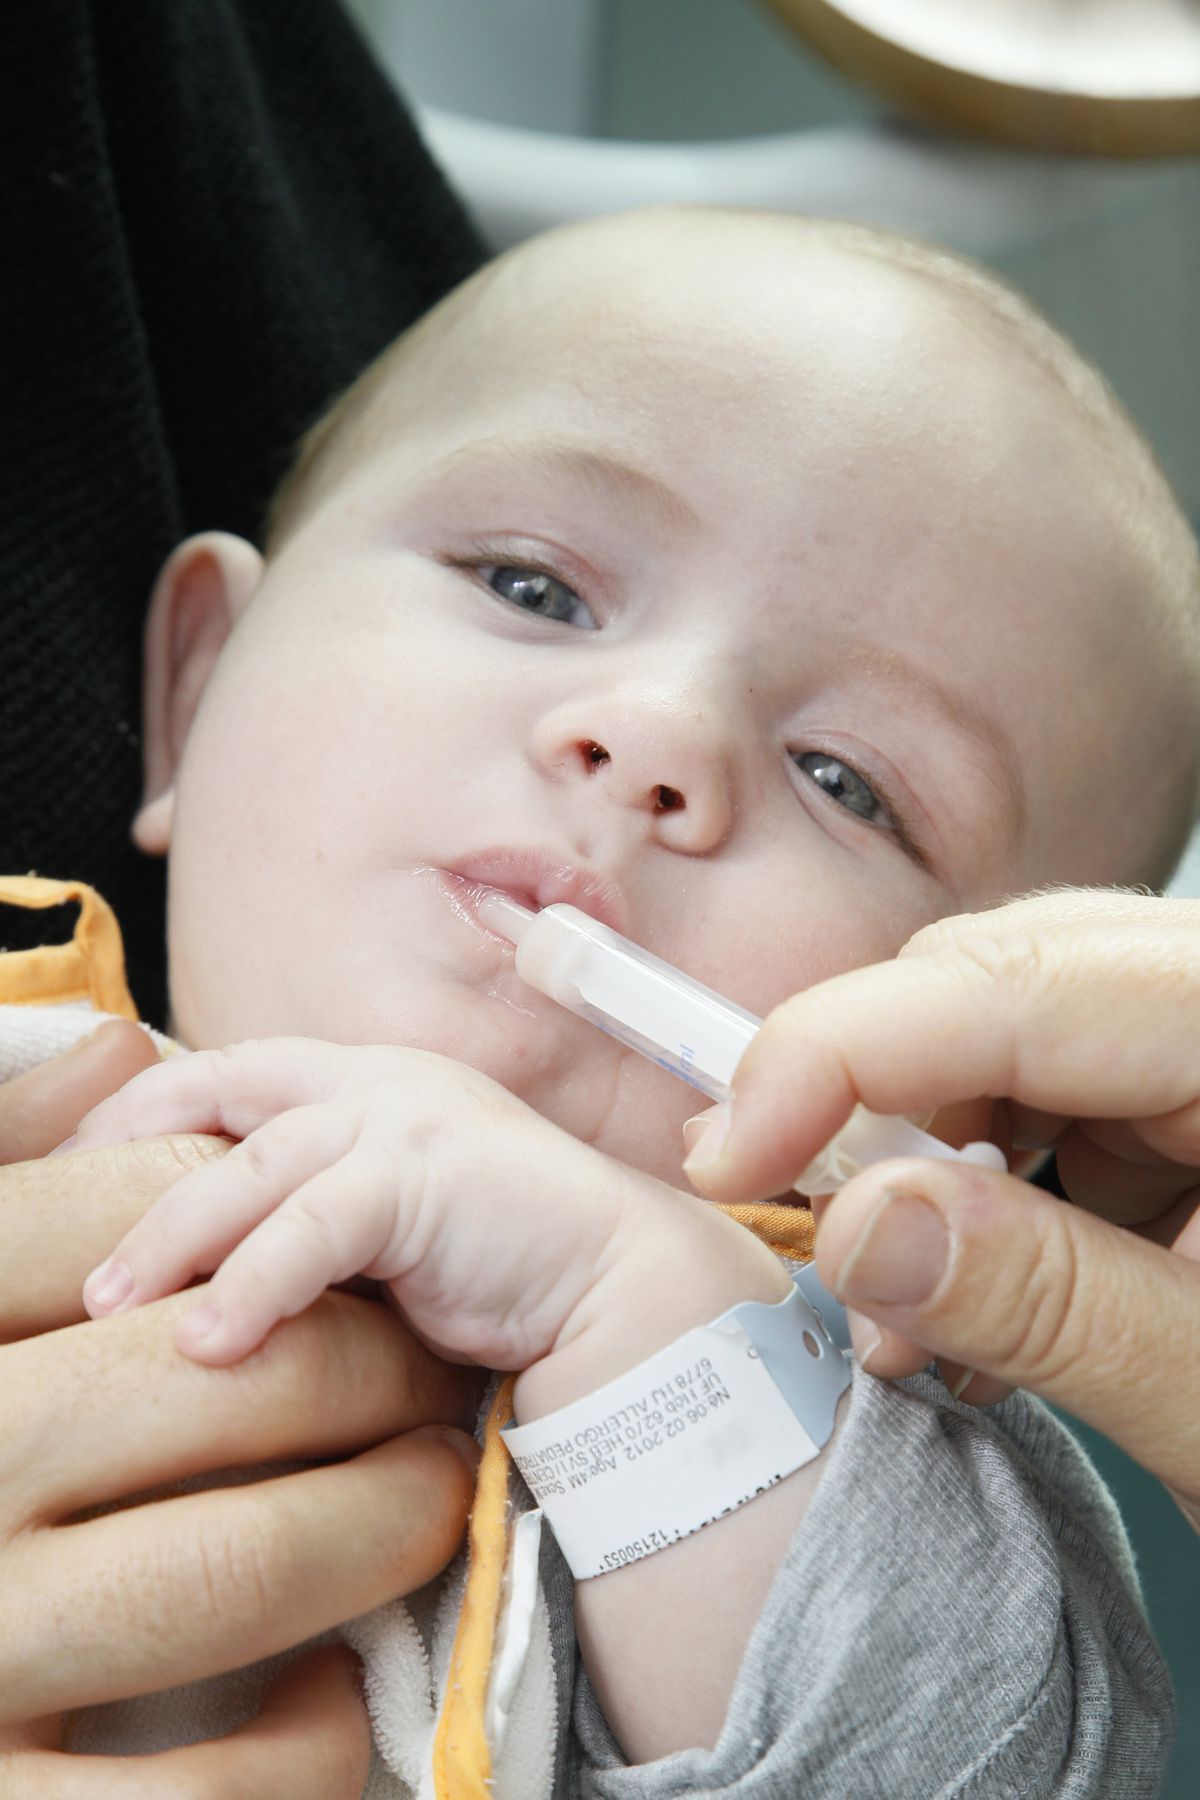 Photo of baby with syringe in its mouth.